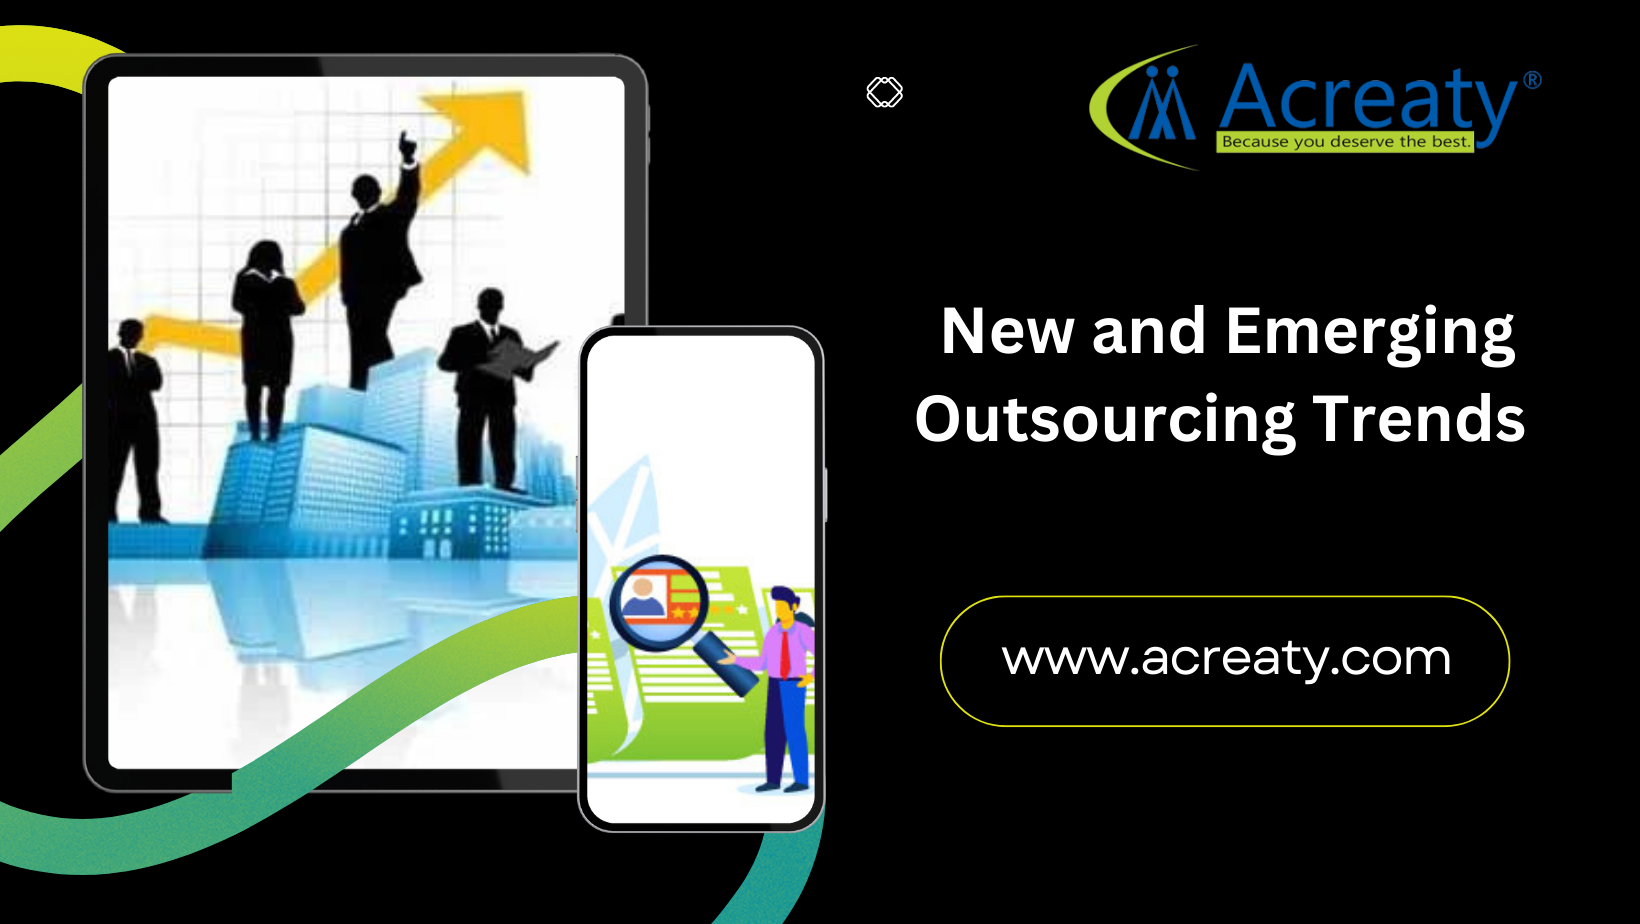 New and Emerging Outsourcing Trends dominating